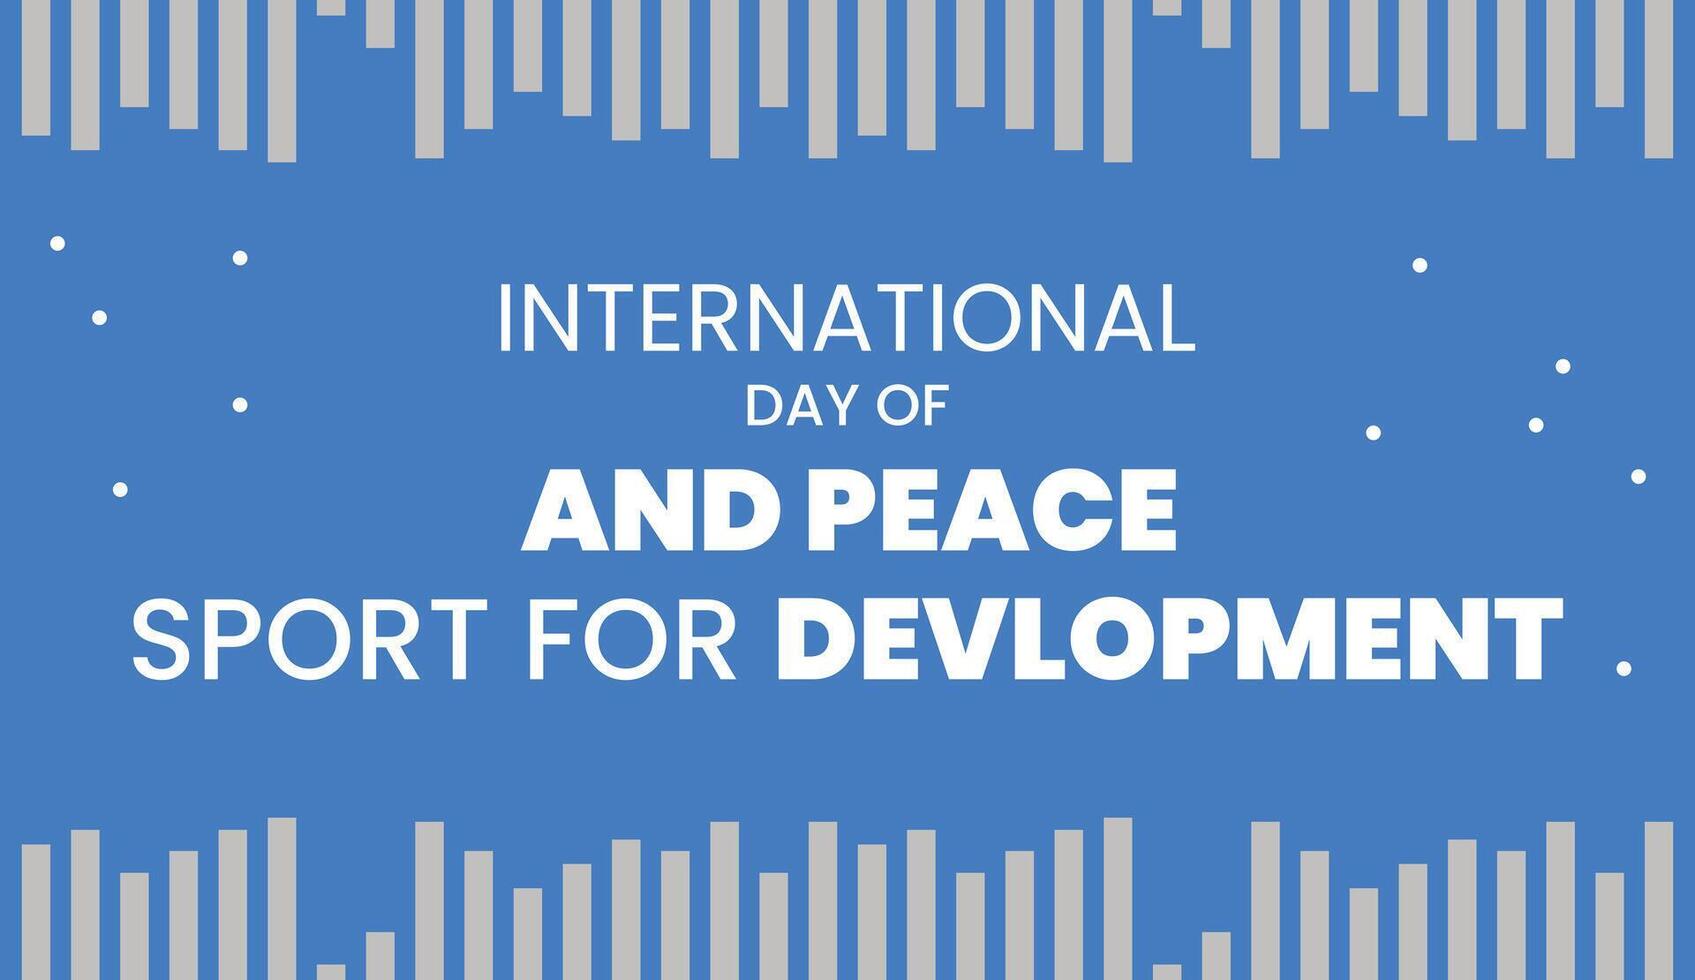 international day of sports devlopment and peace vector